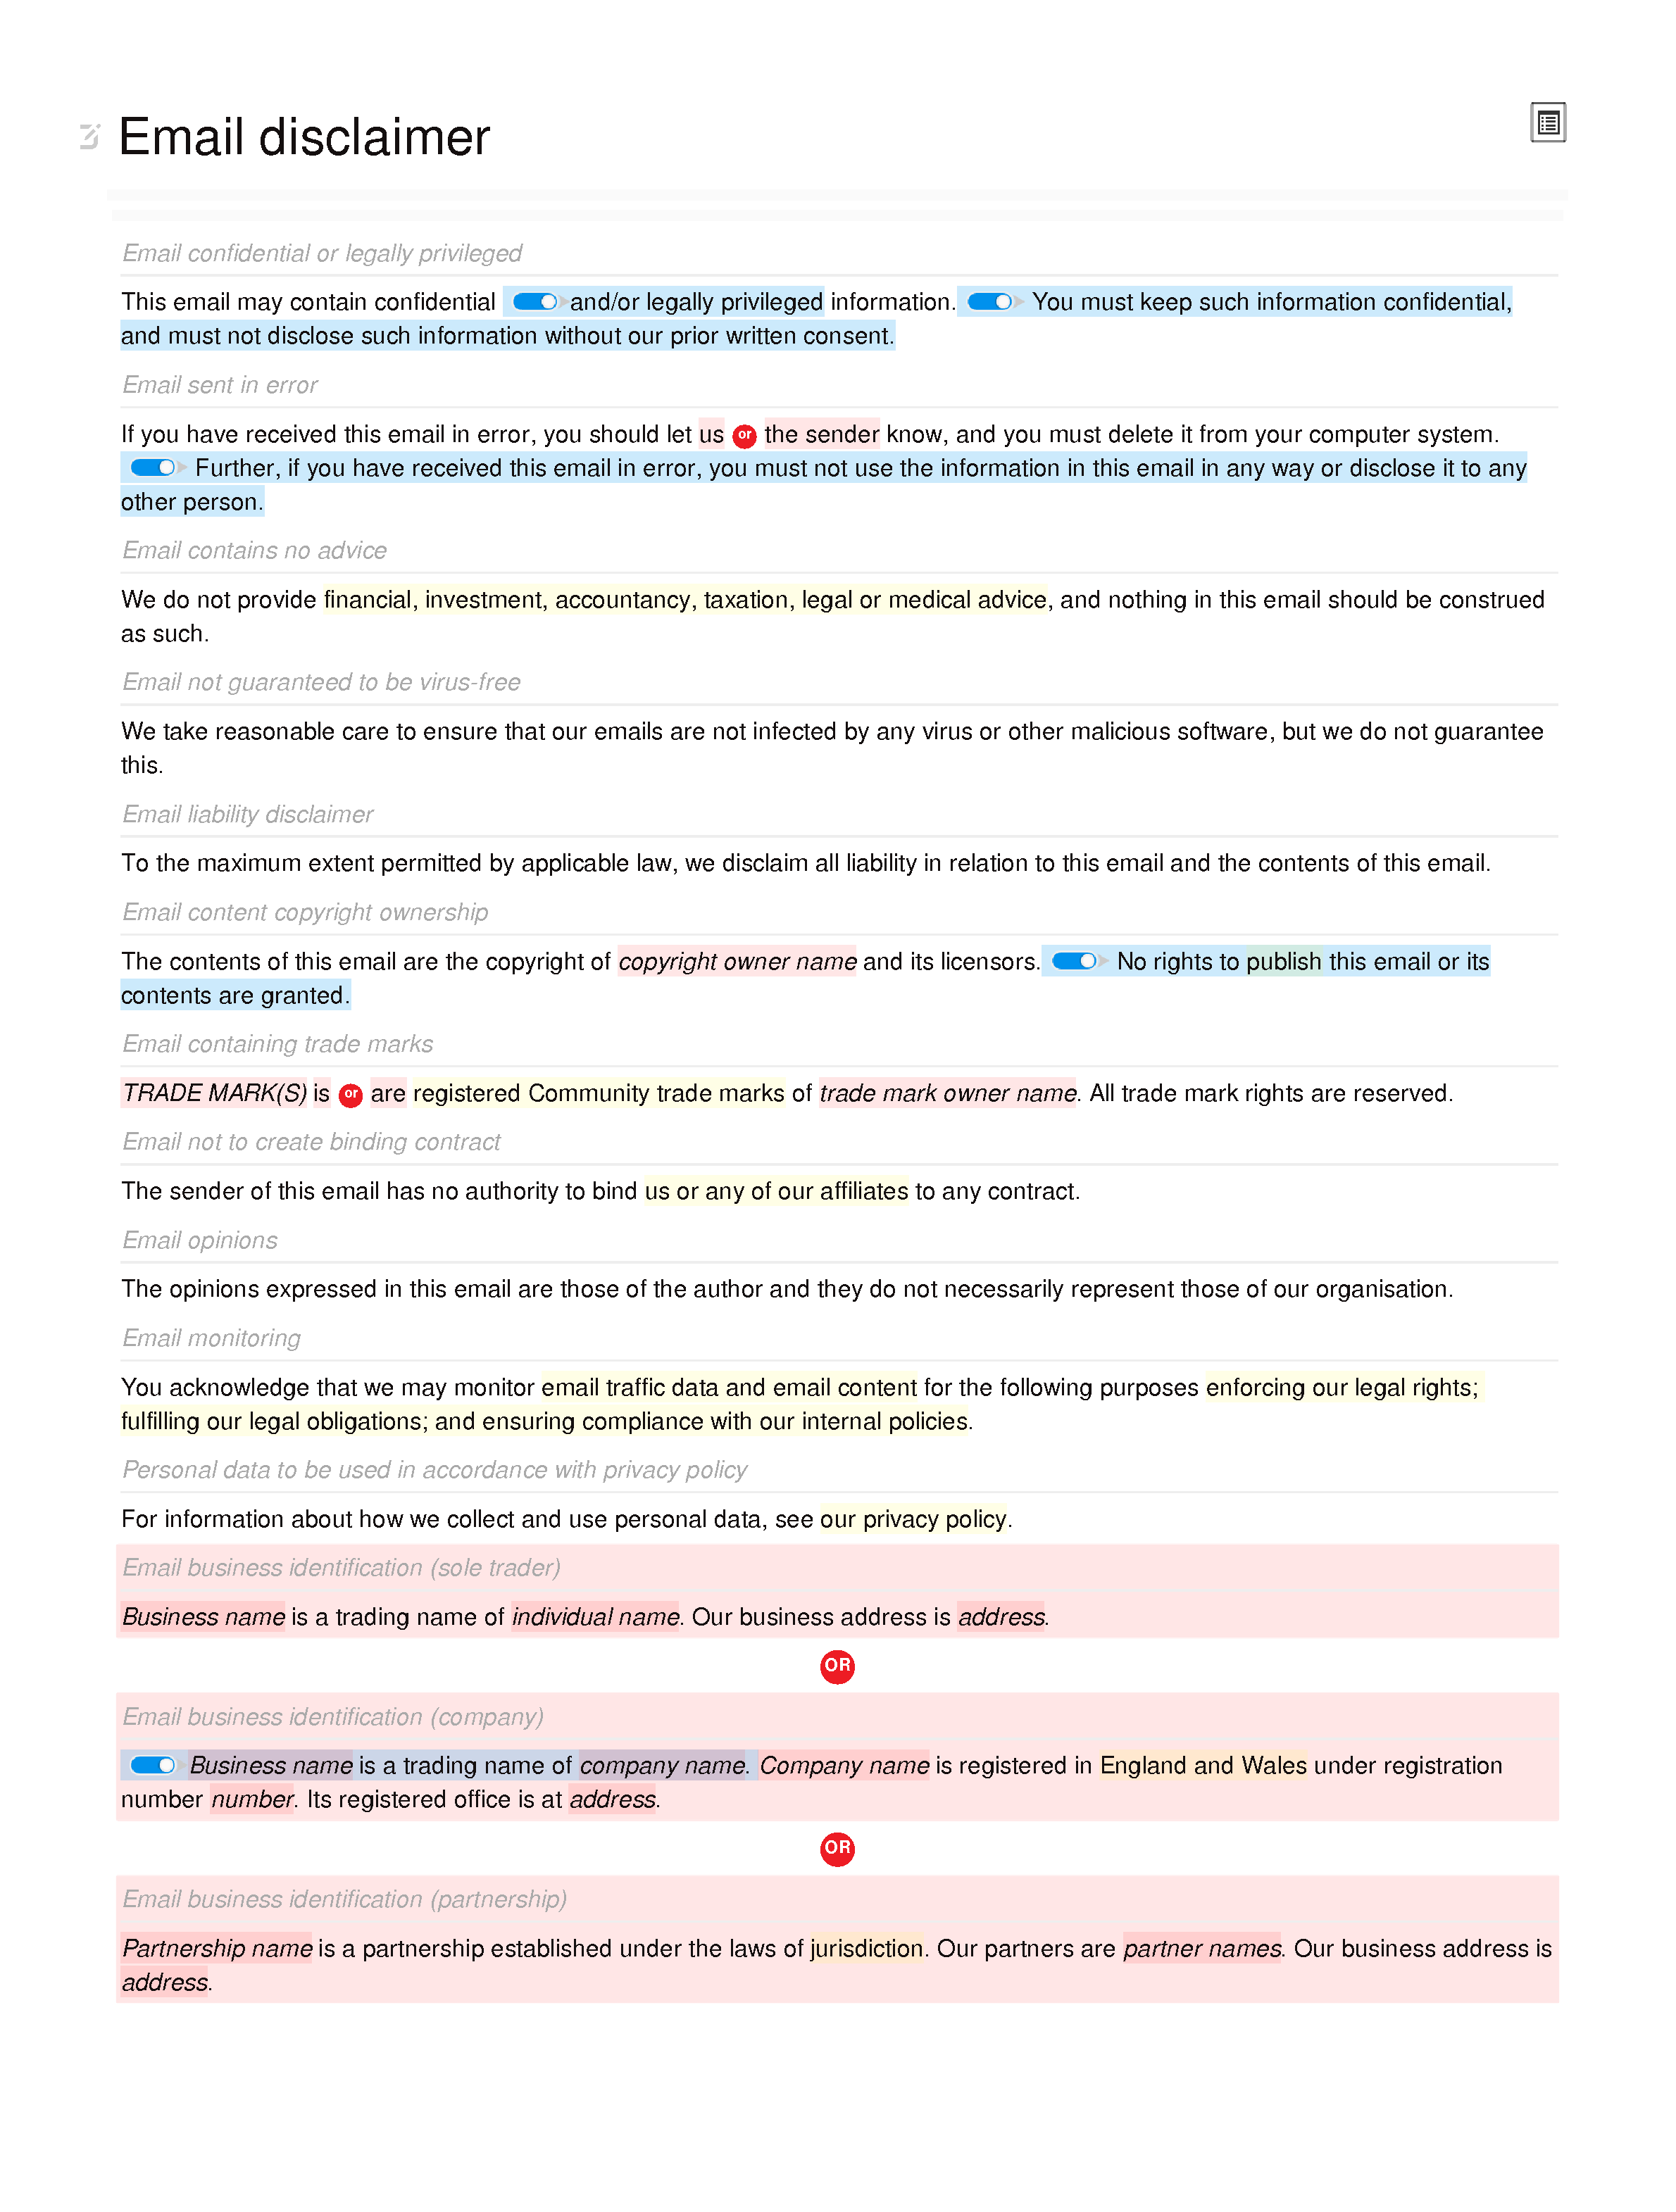 Email disclaimer document editor preview